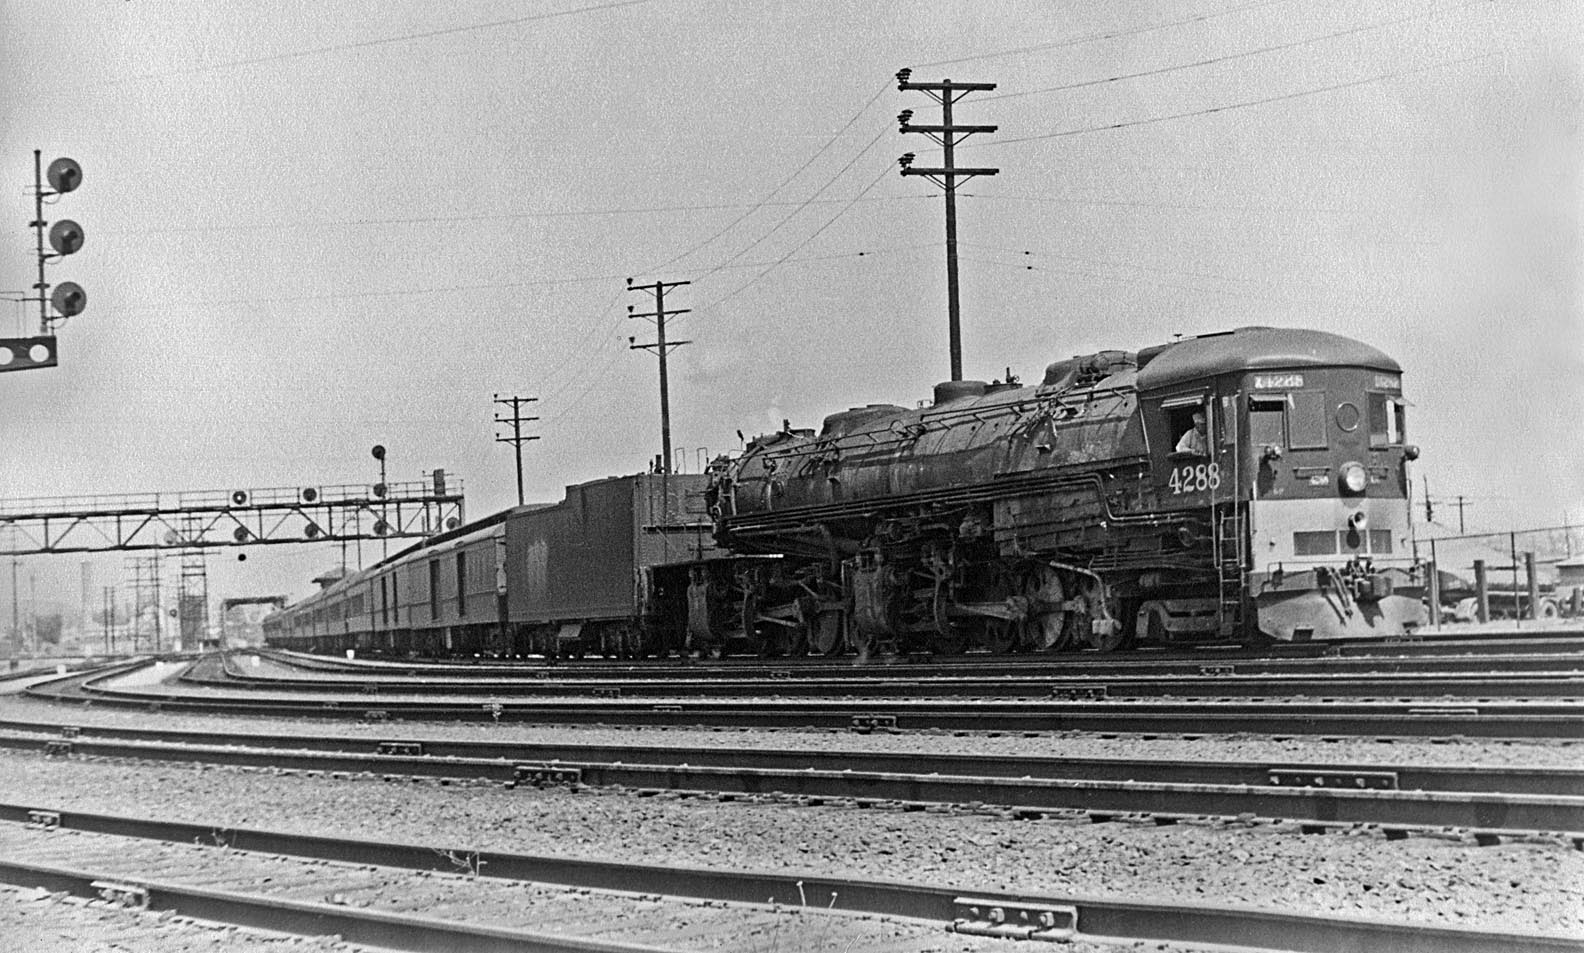 Arriving at Union Station in Los Angeles. Southern Pacific was unique in its use of the massive cab-forward design, intended to keep crewmen cooler and awake while traversing the numerous tunnels on many of the Line's routes.  

The picture is from the late 40s or early 50s. 

Photographer: Don Hall, Sr.

Don Hall
Yreka, CA